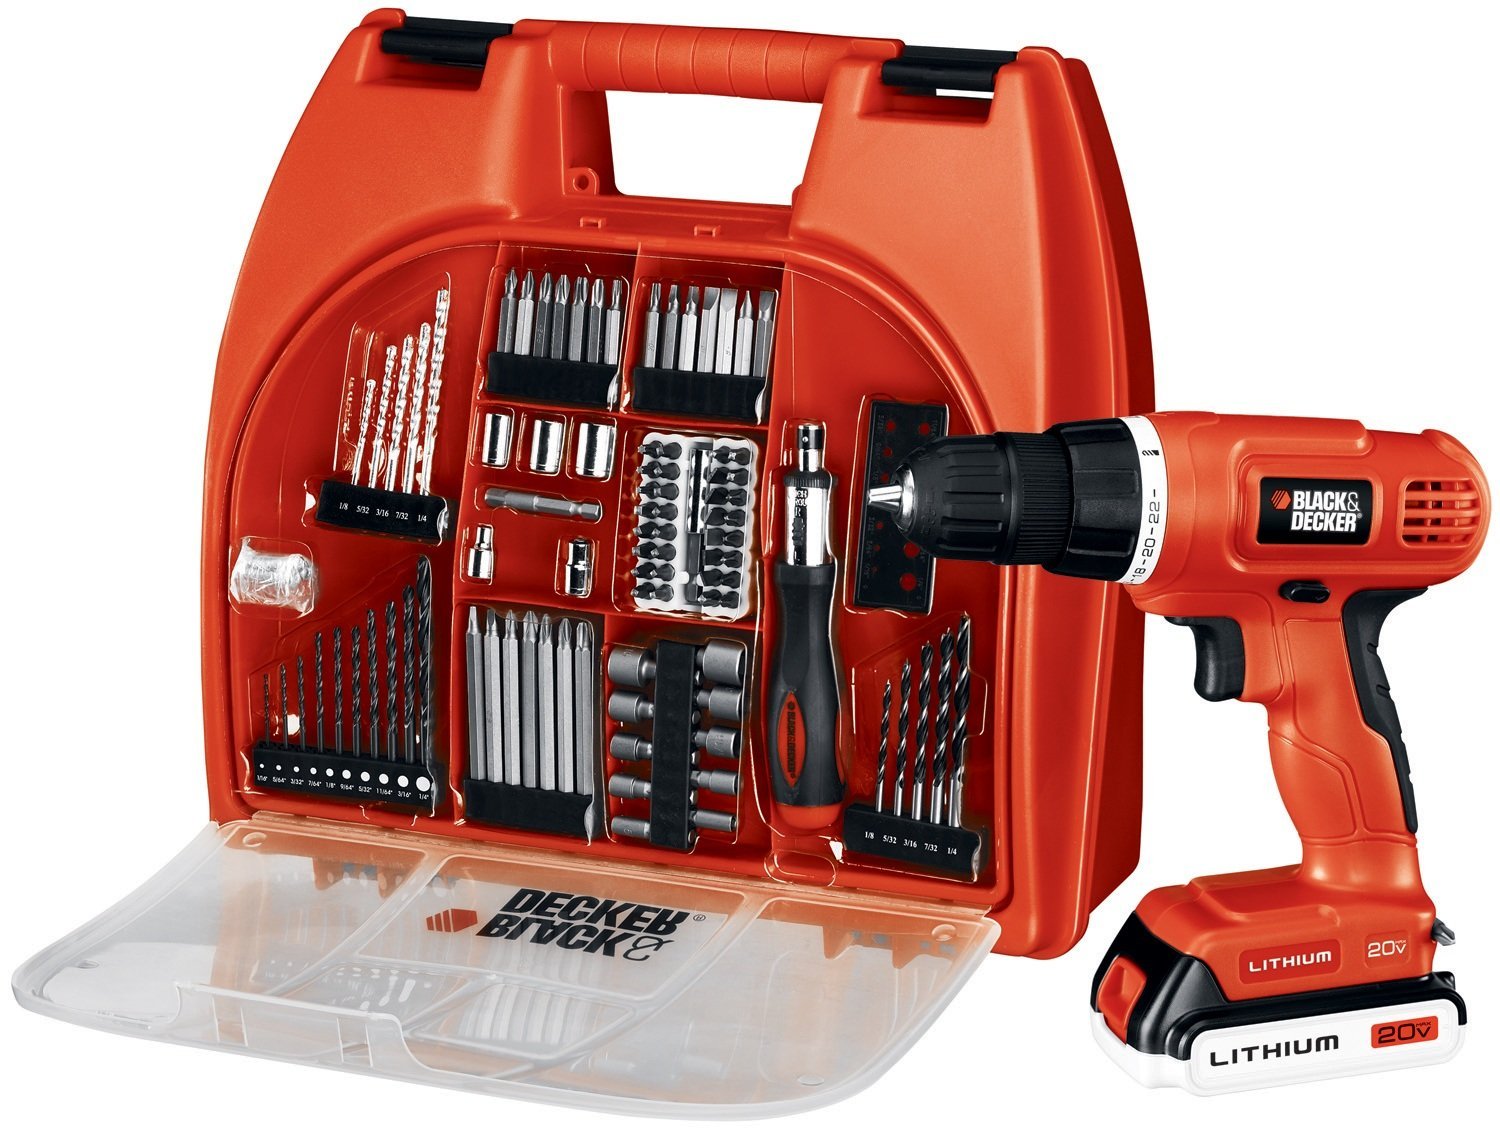 https://9to5toys.com/wp-content/uploads/sites/5/2015/06/black-decker-20-volt-max-lithium-ion-drill-kit-with-100-accessories-sale-01.jpg